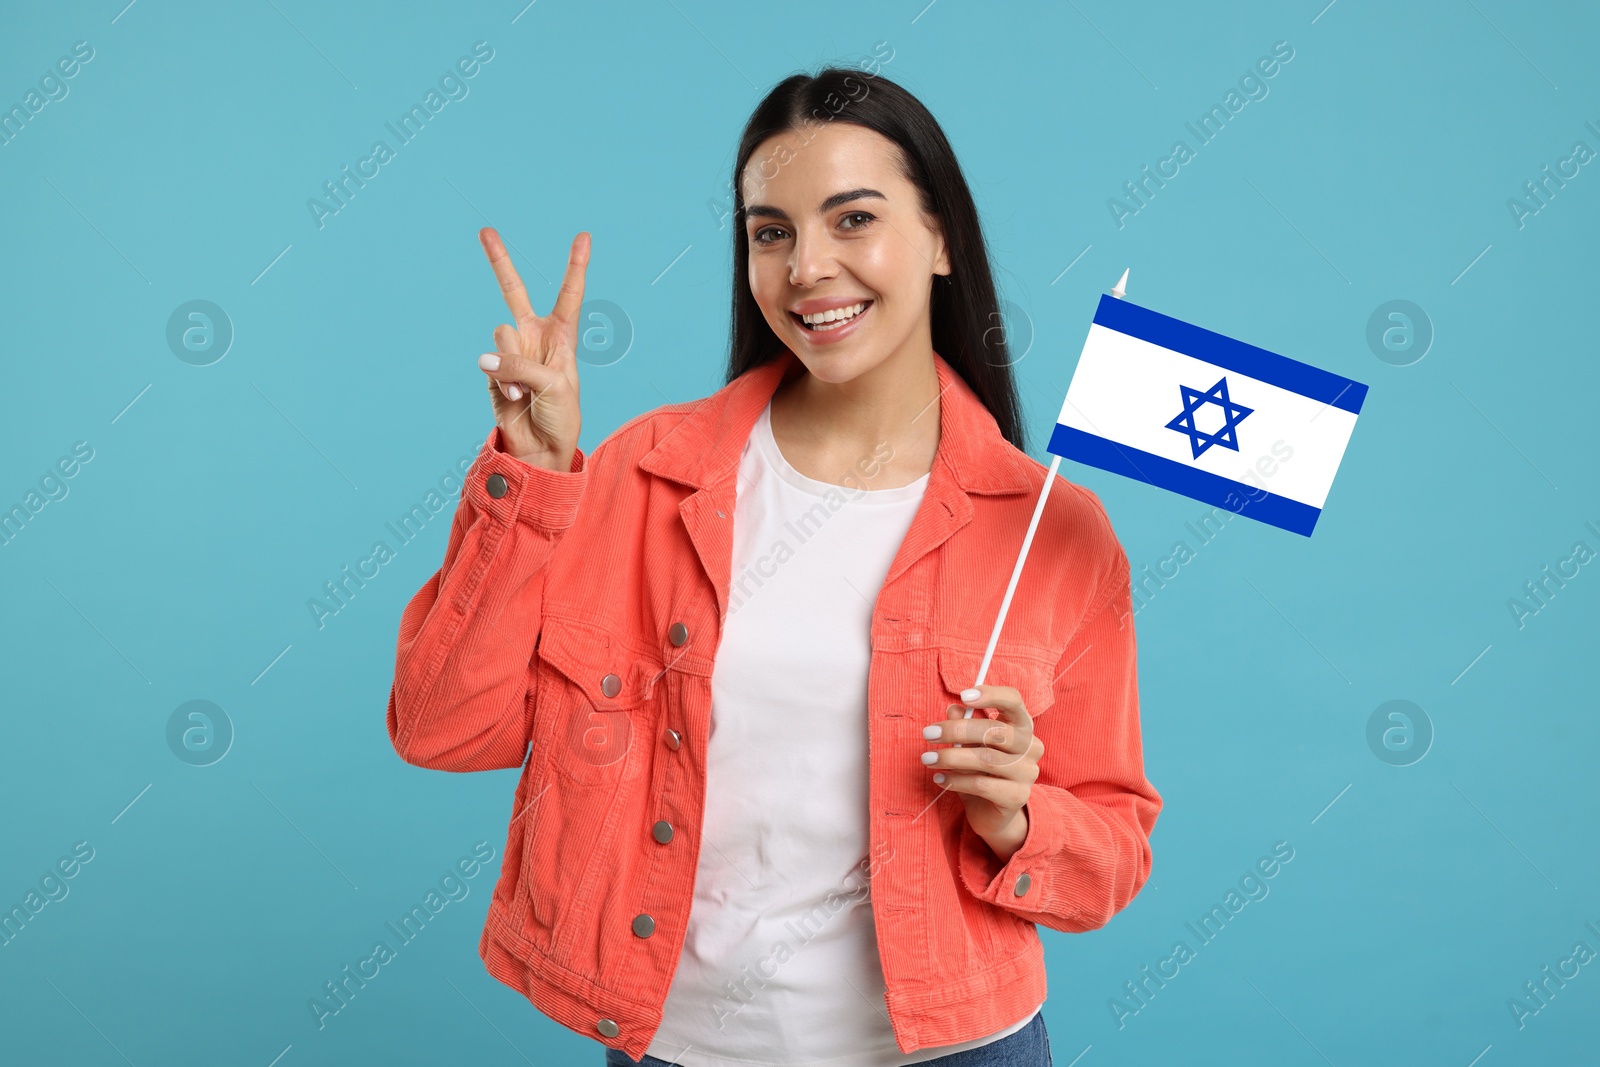 Image of Happy young woman with flag of Israel showing V-sign on light blue background